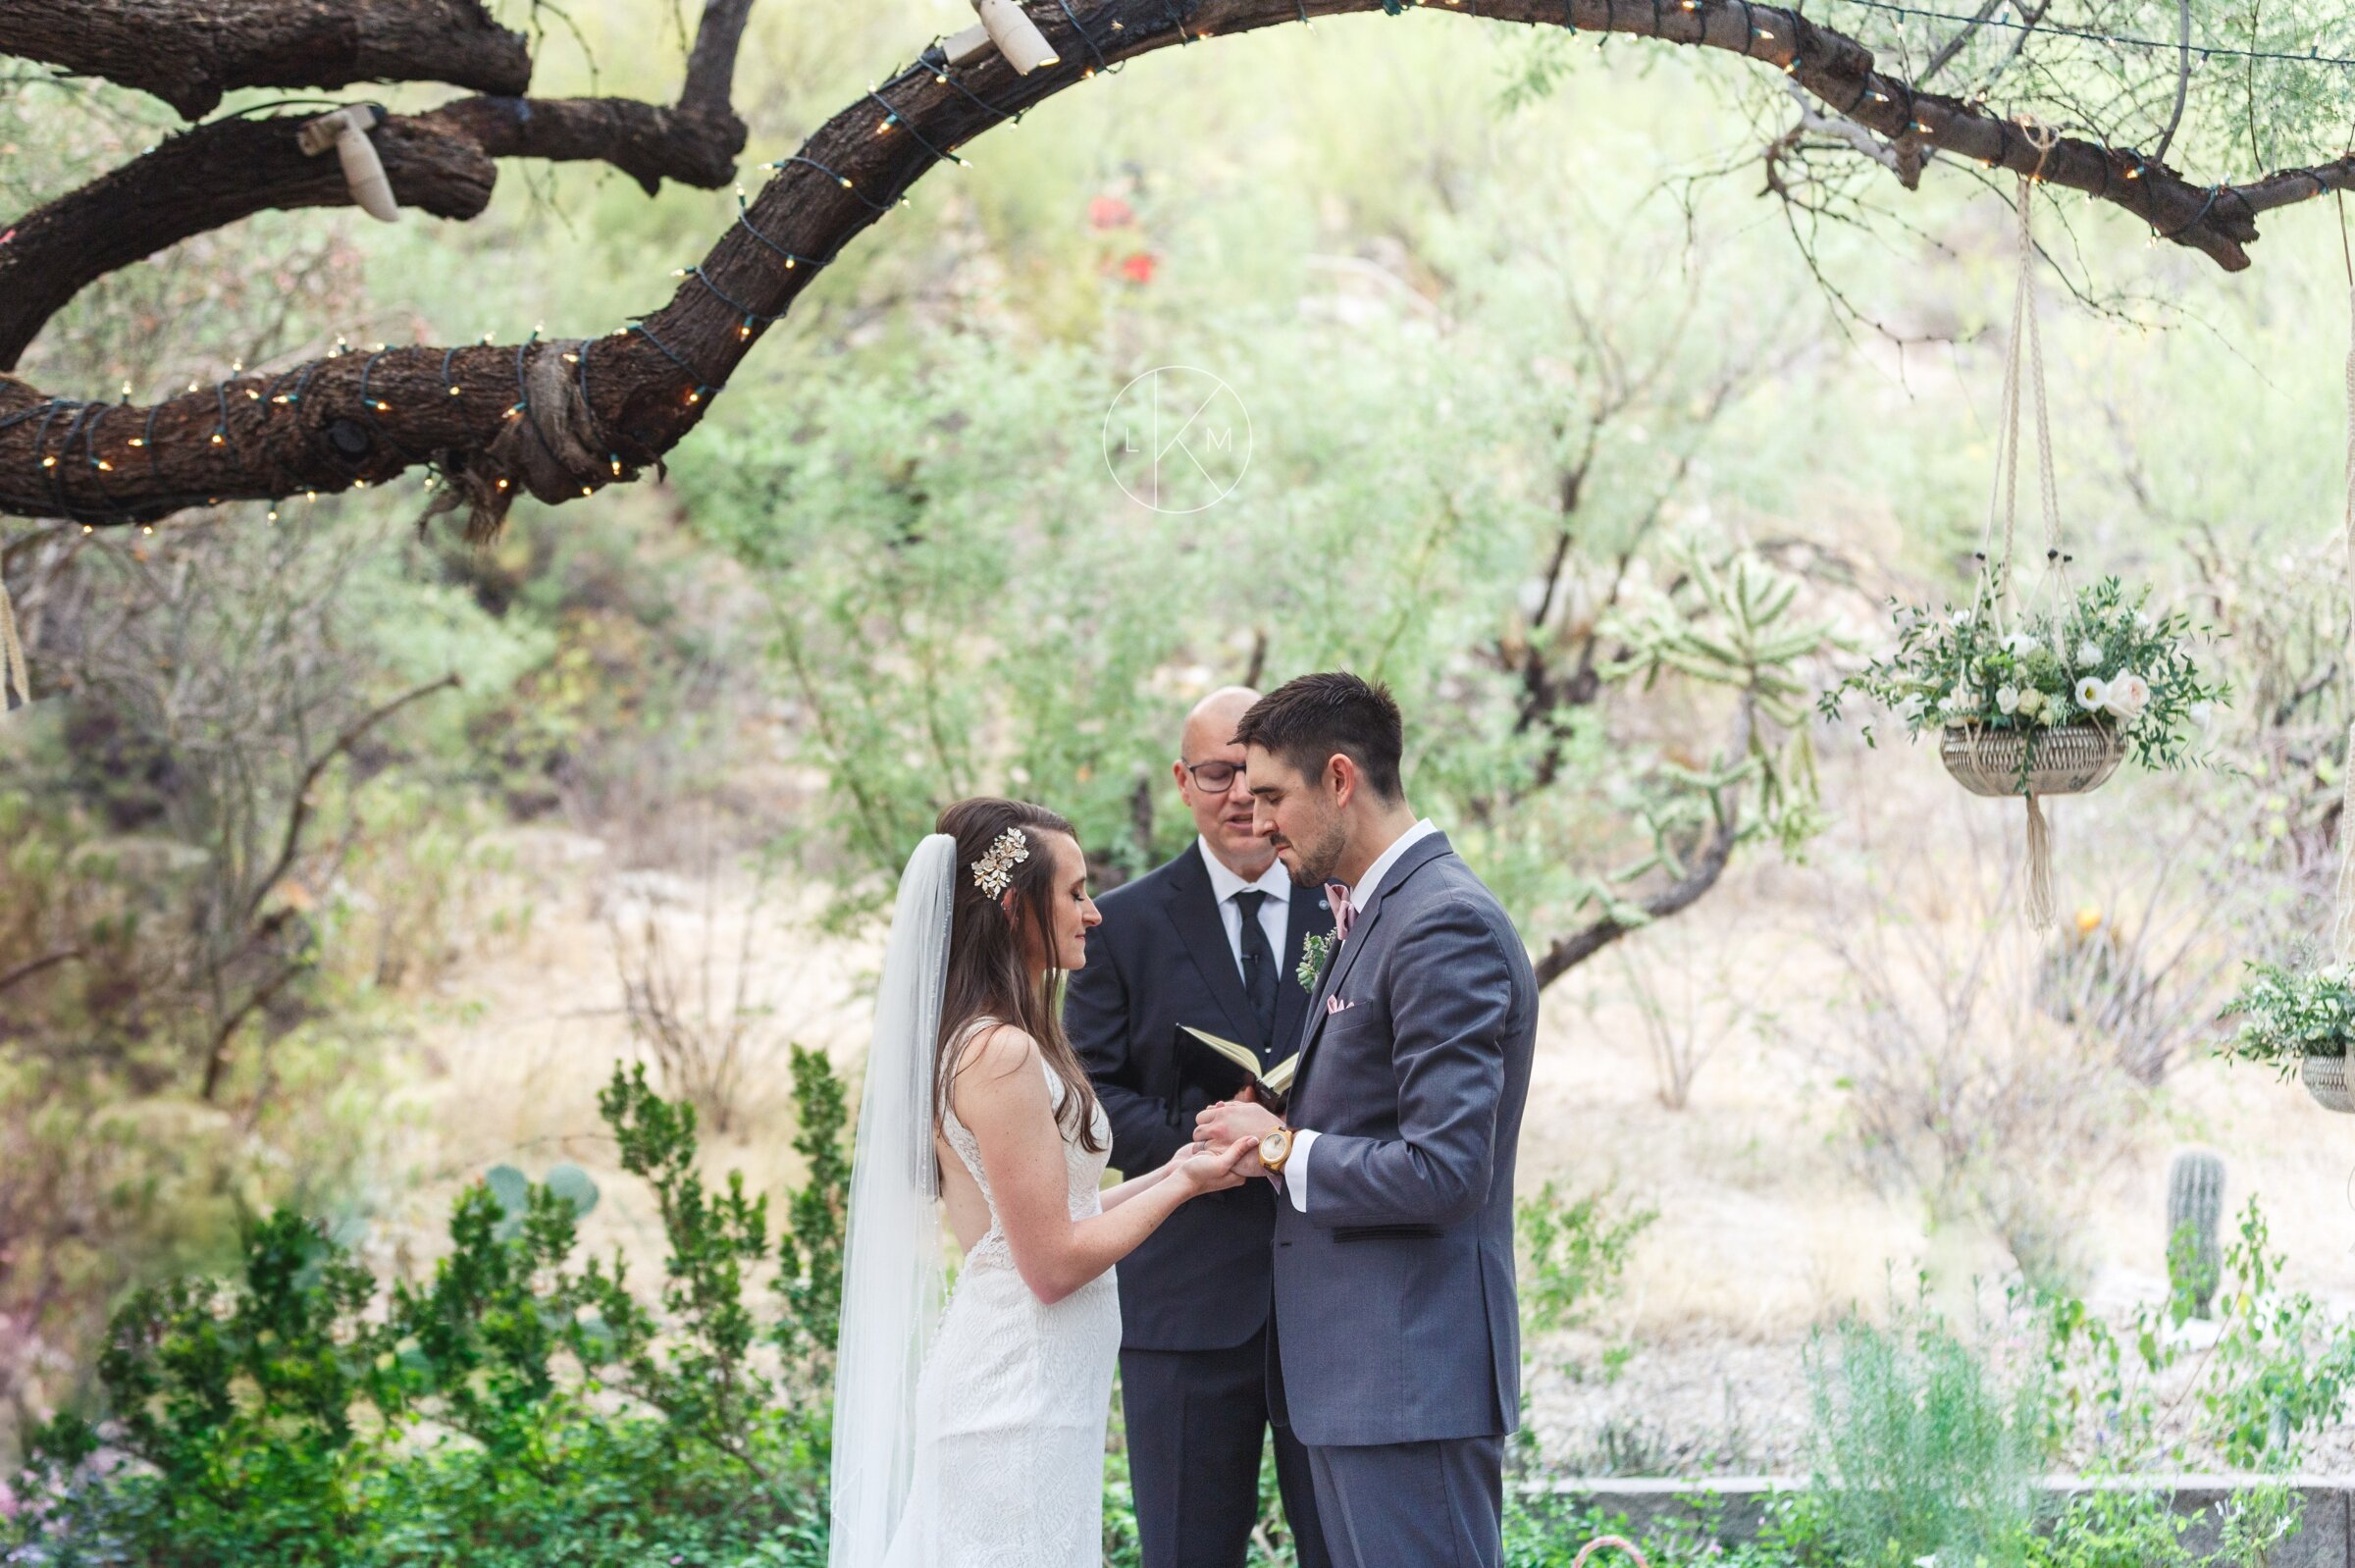 20_09_12_CLUTTER_LOWES_VENTANA_CANYON_WEDDING-PICTURES_laura-k-moore-photography 29.jpg